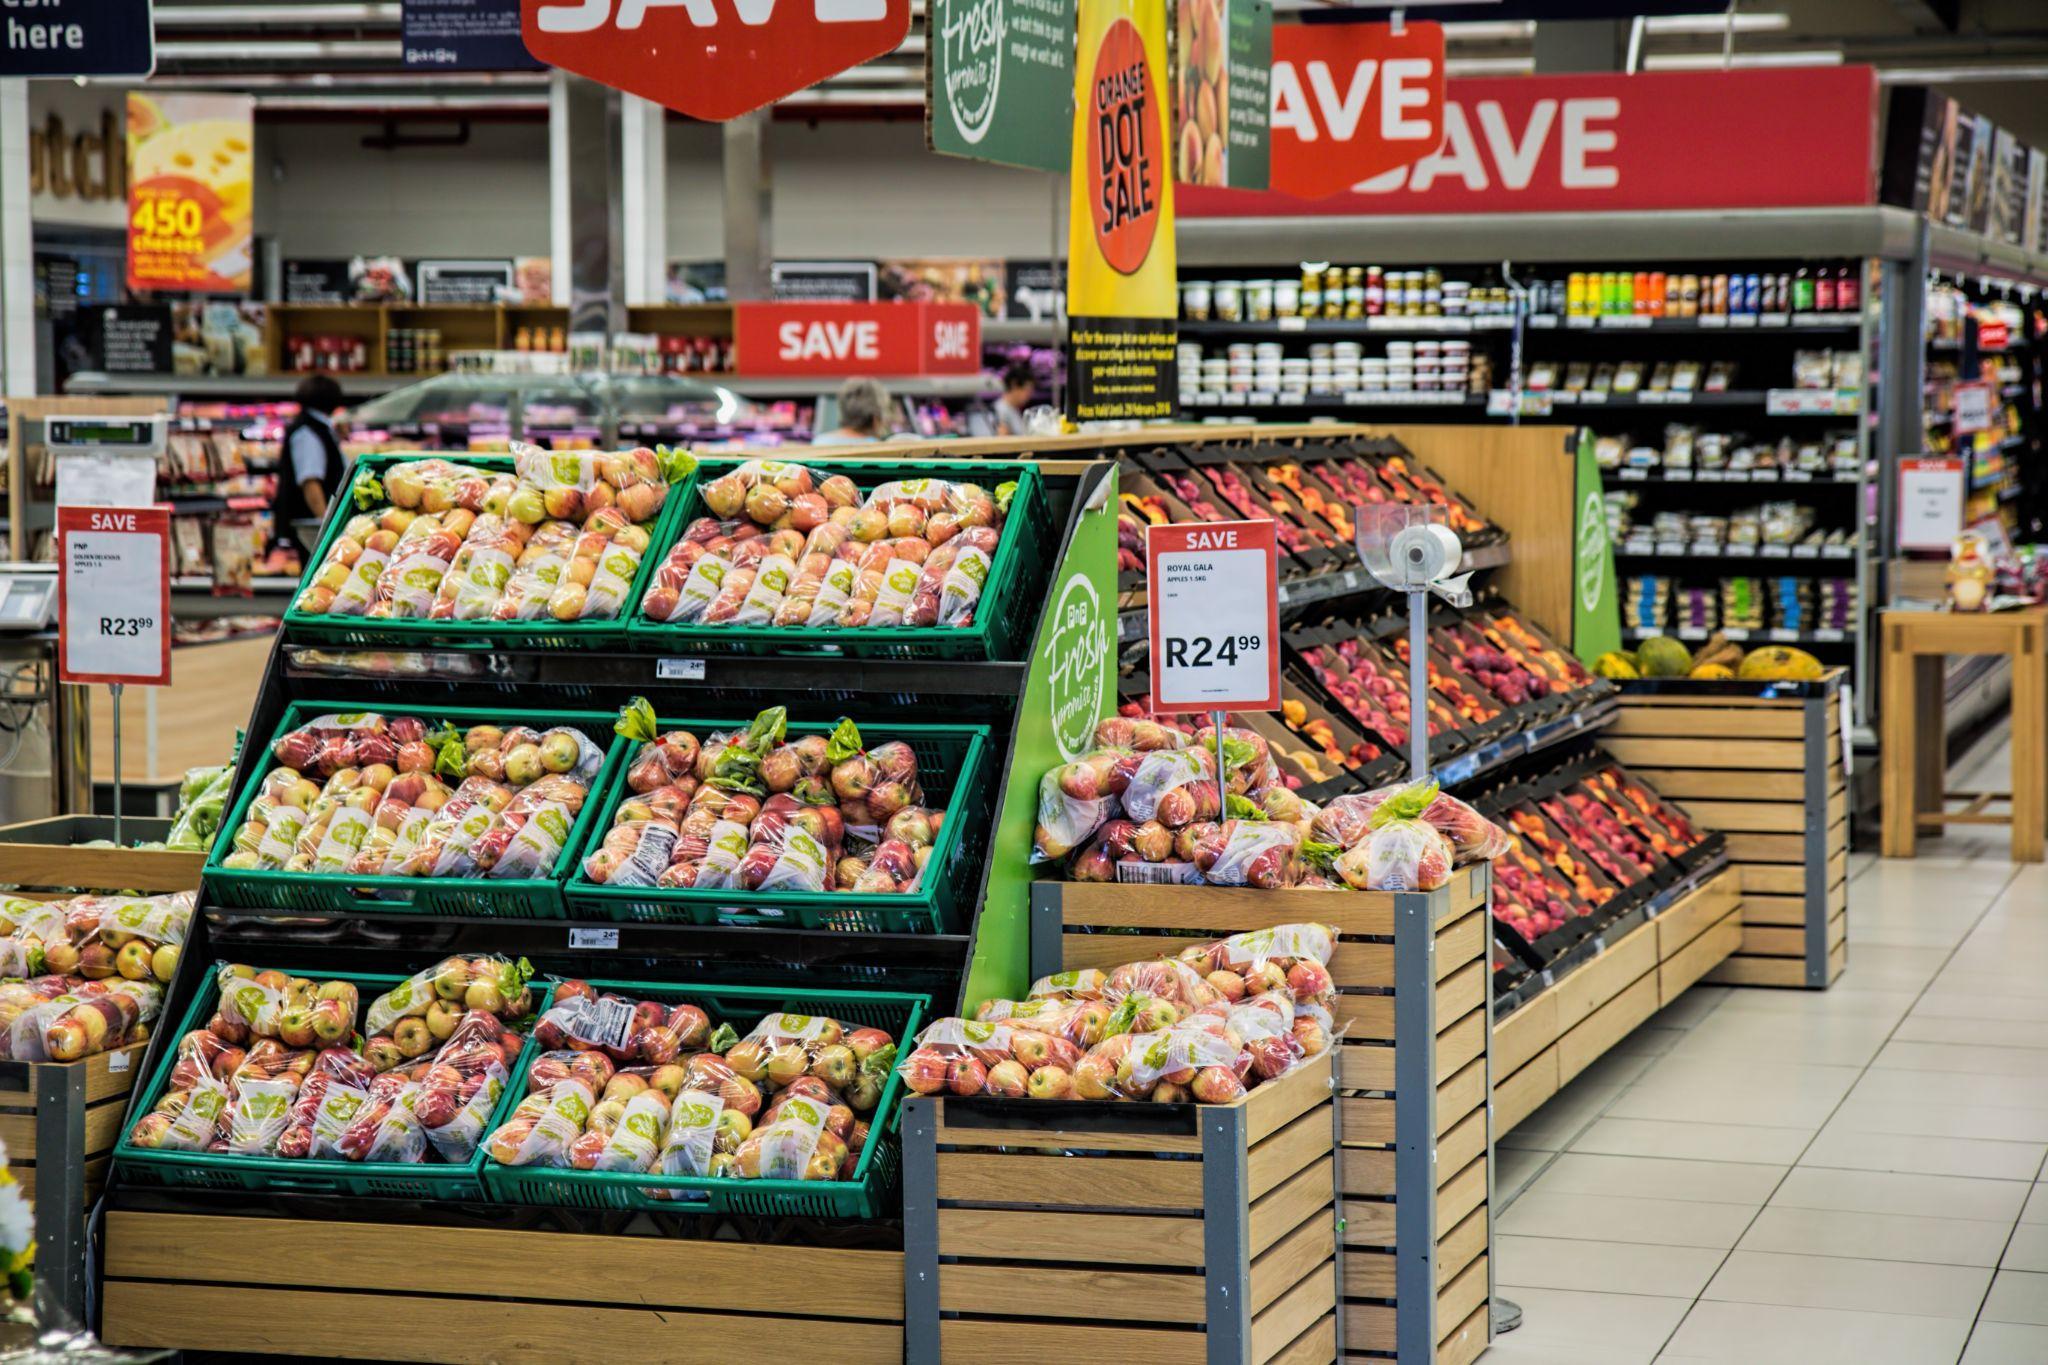 Customer Engagement Activities for Your Grocery Store